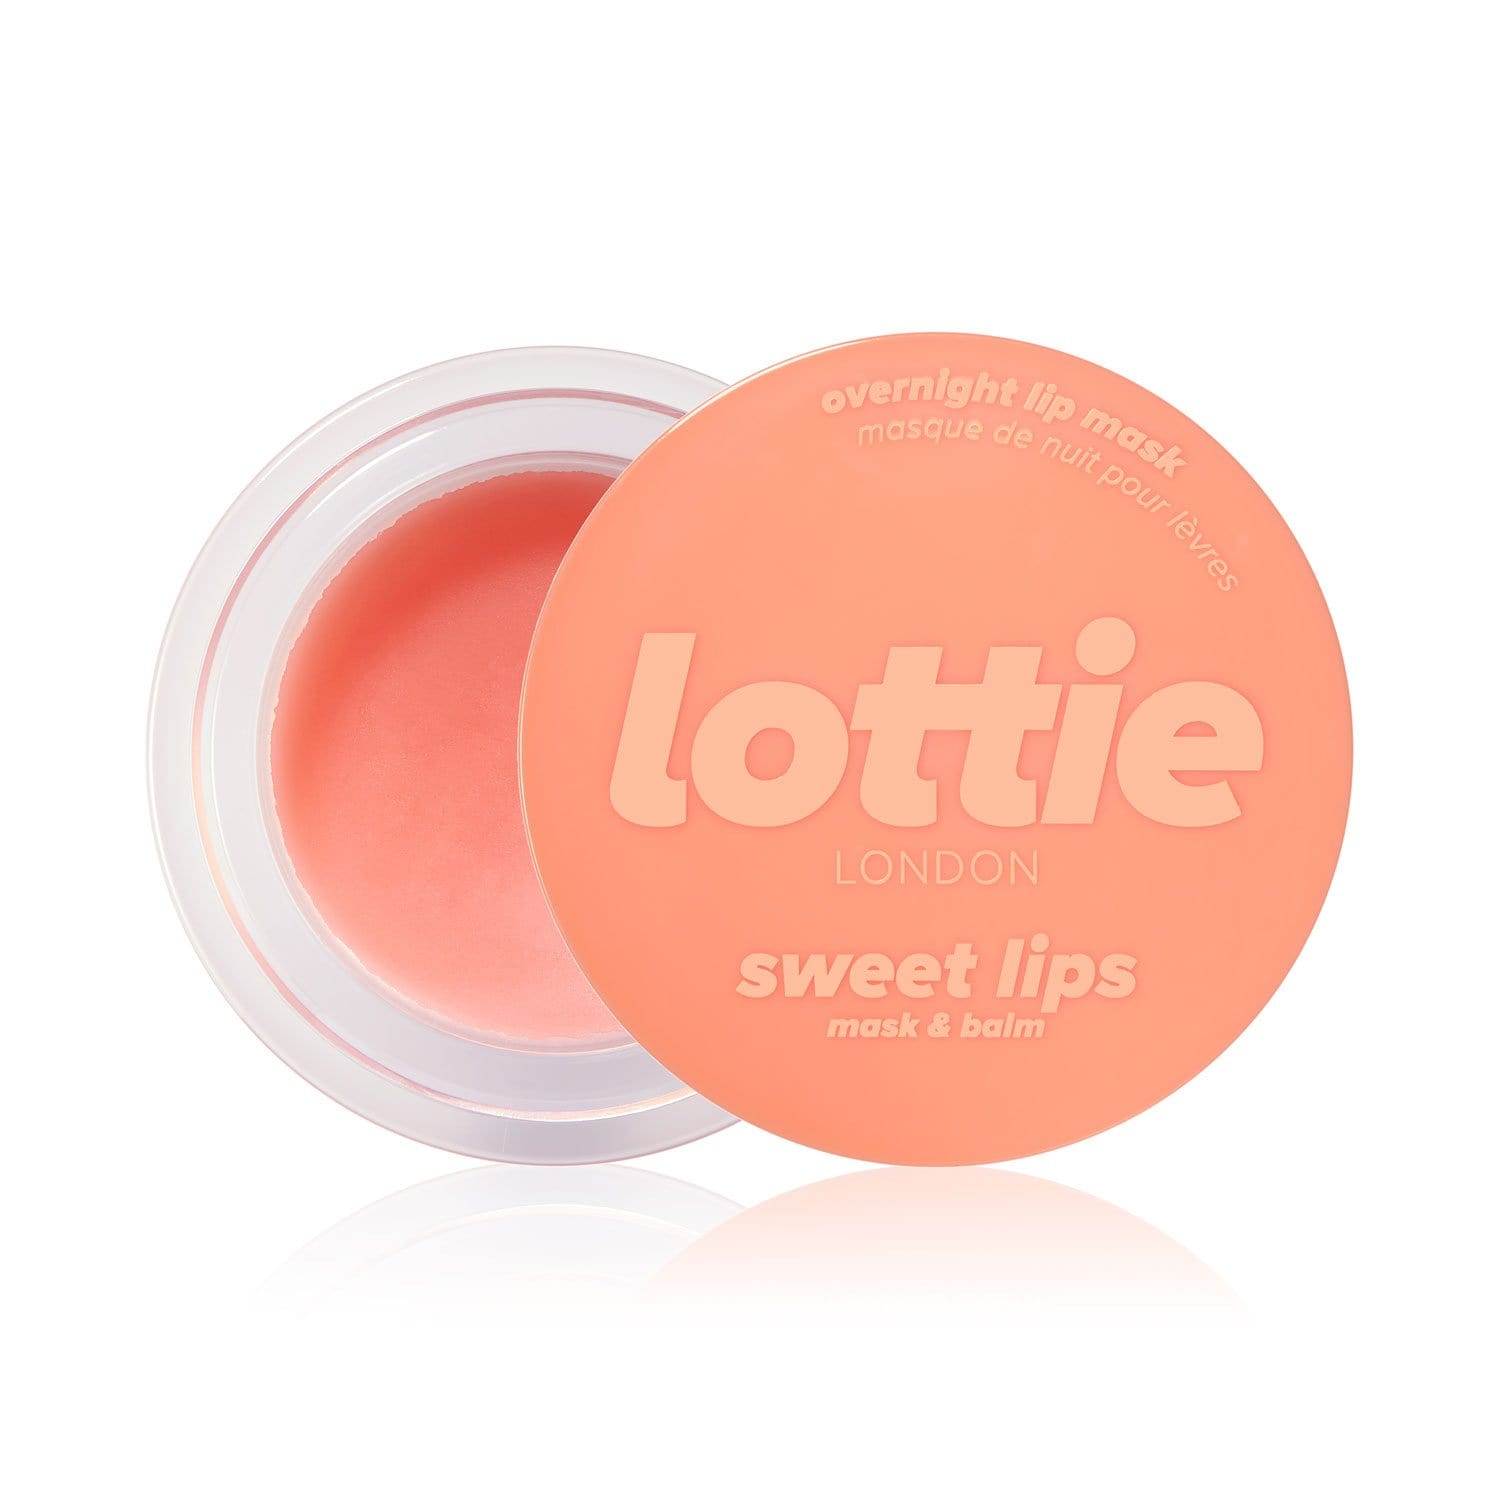 Sweet Lips Totally Coco Makeup Overnight Lip Mask & Balm